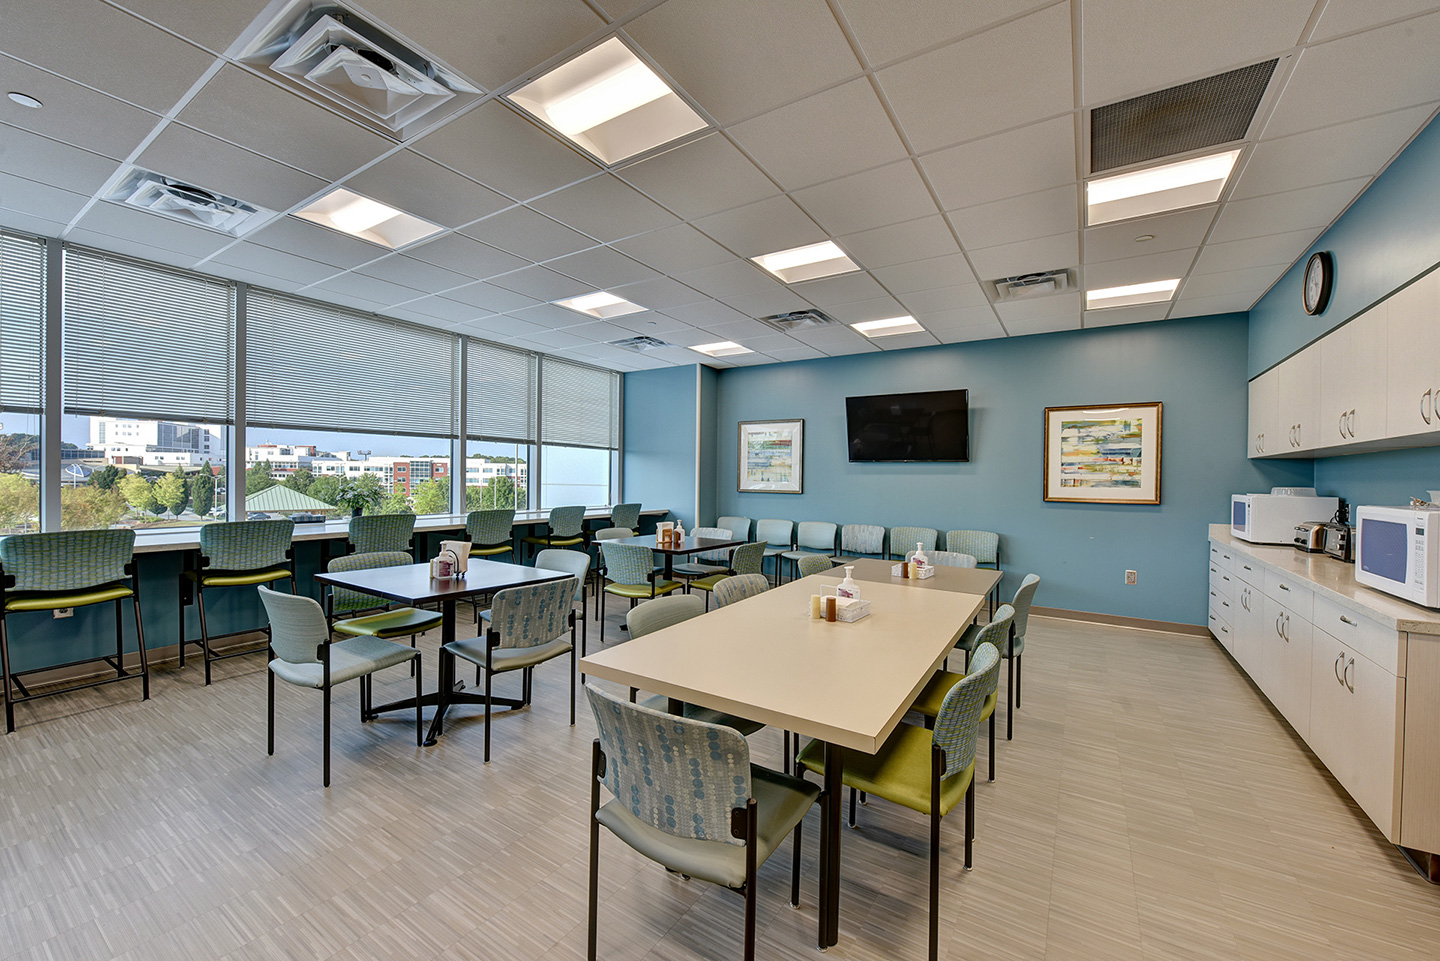 Staff Break Area with tranquil colors, comfortable seating, natural light and great views.